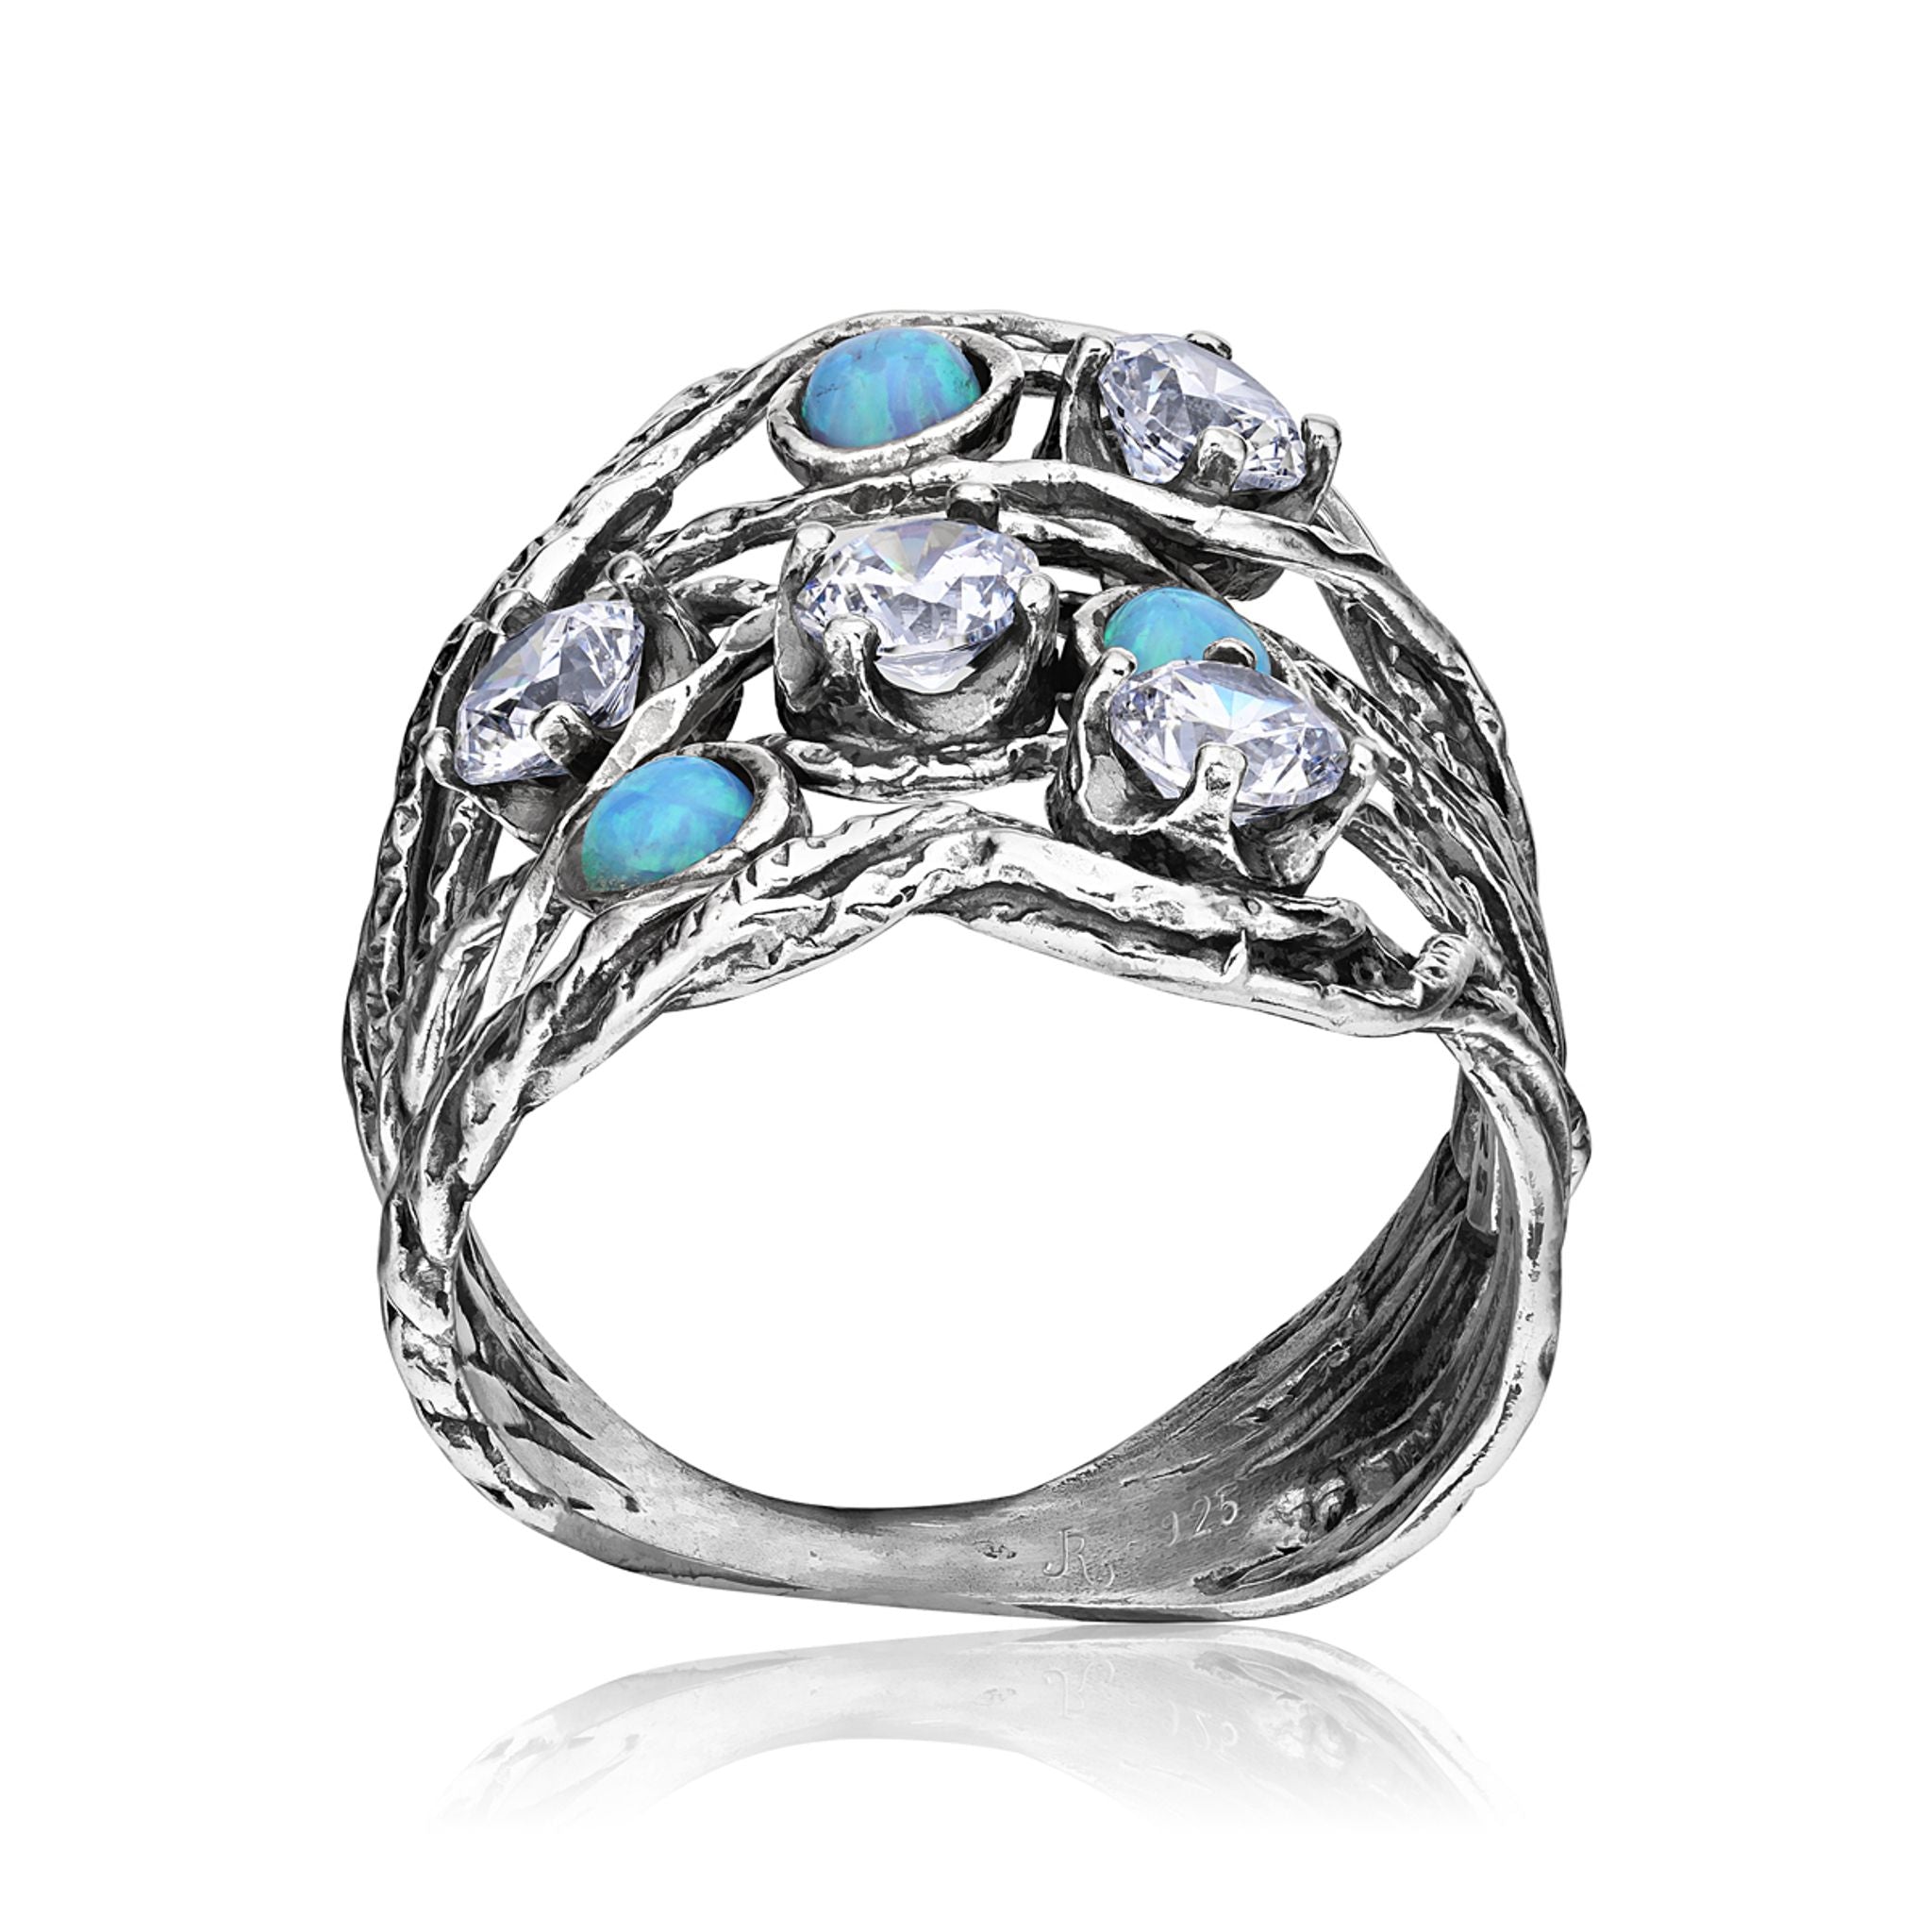 Intricate Sterling Silver Opal and CZ Ring